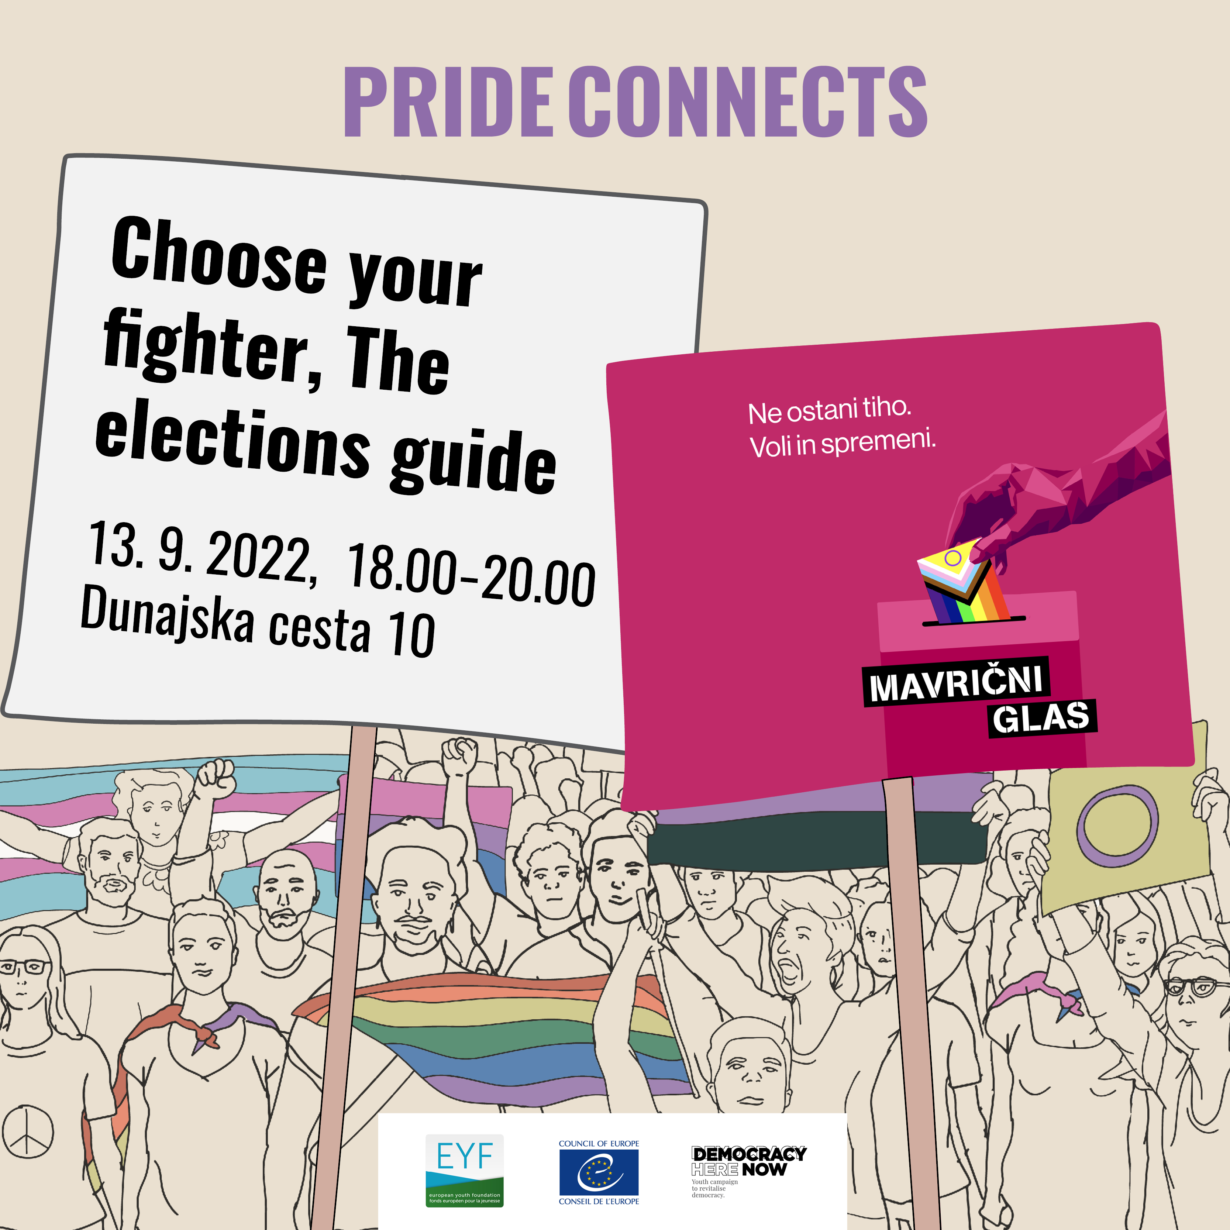 Pride Connects: “Choose your fighter, The elections guide”